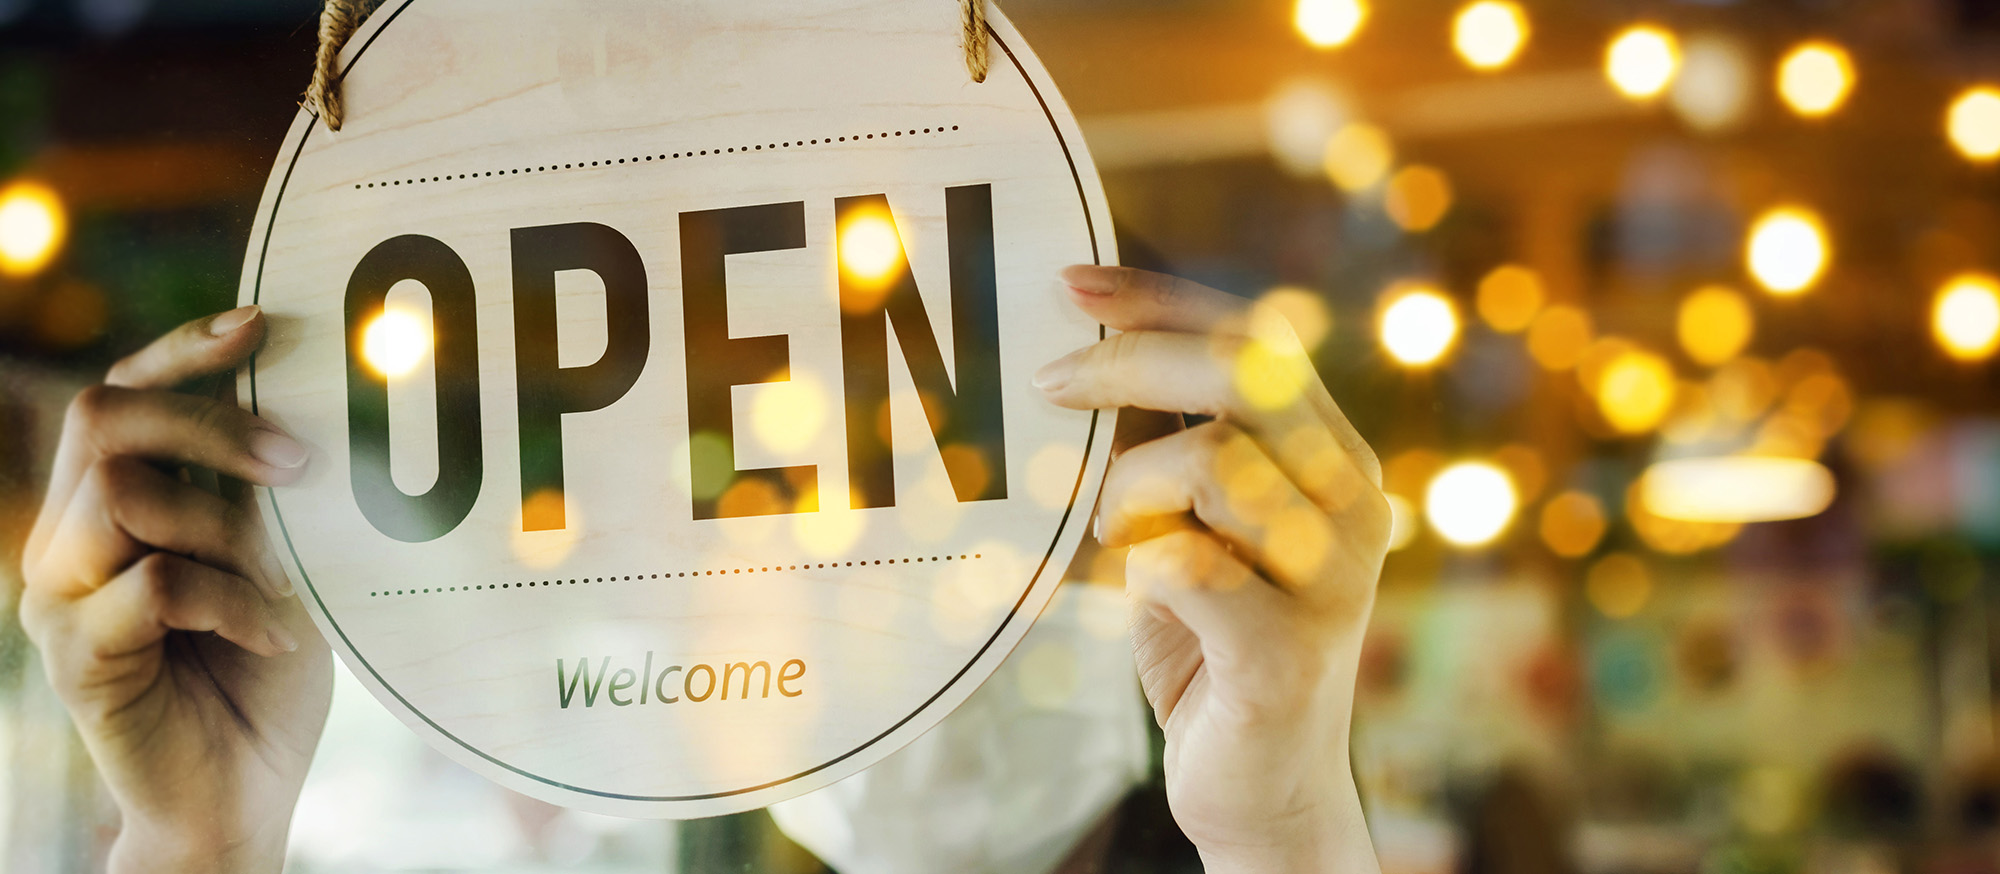 Open welcome sign in window